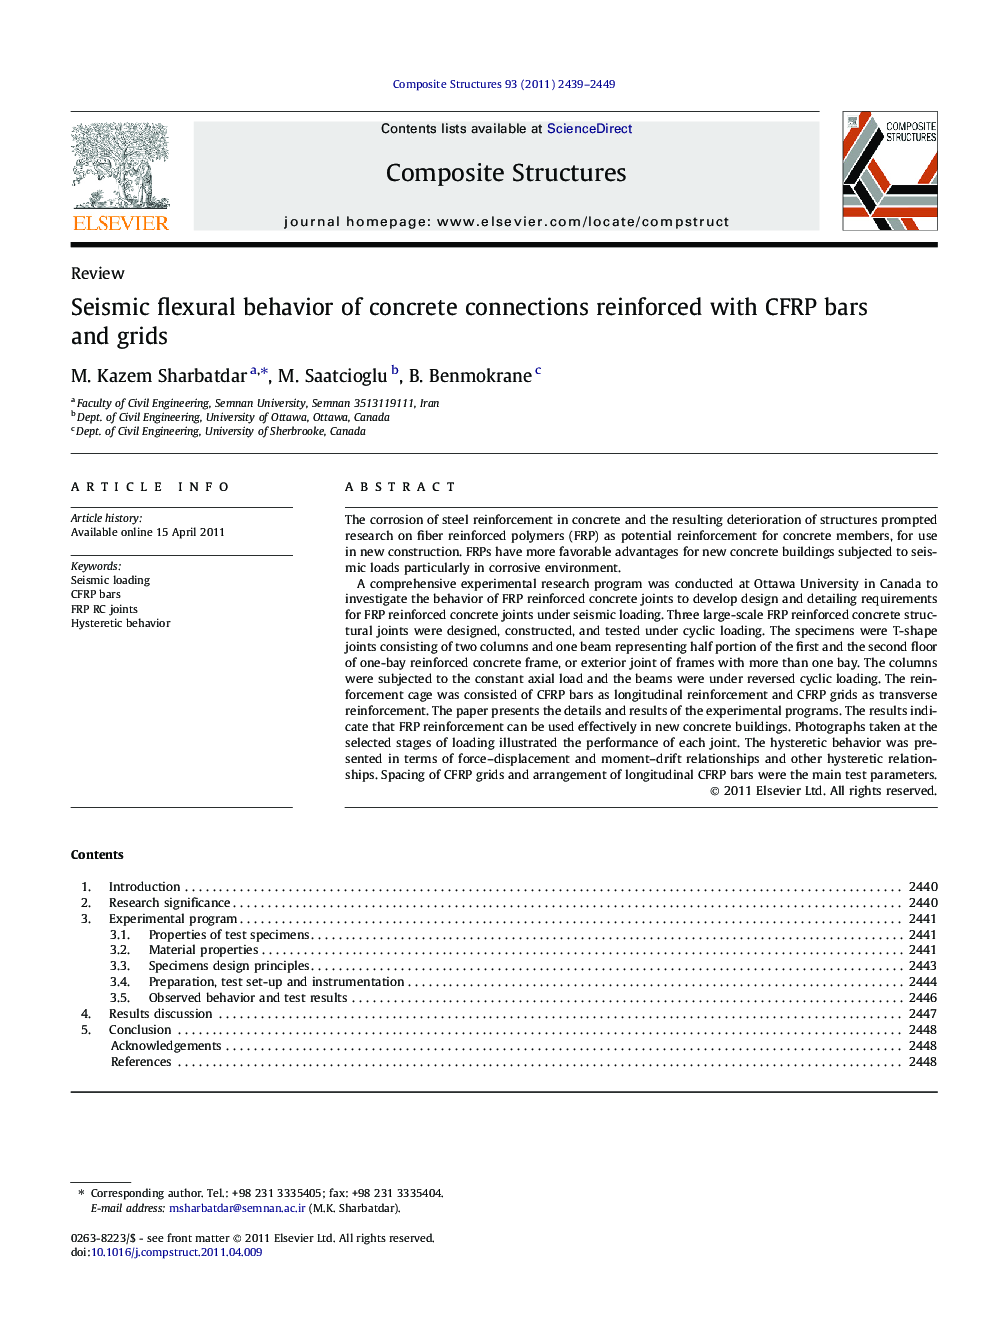 Seismic flexural behavior of concrete connections reinforced with CFRP bars and grids